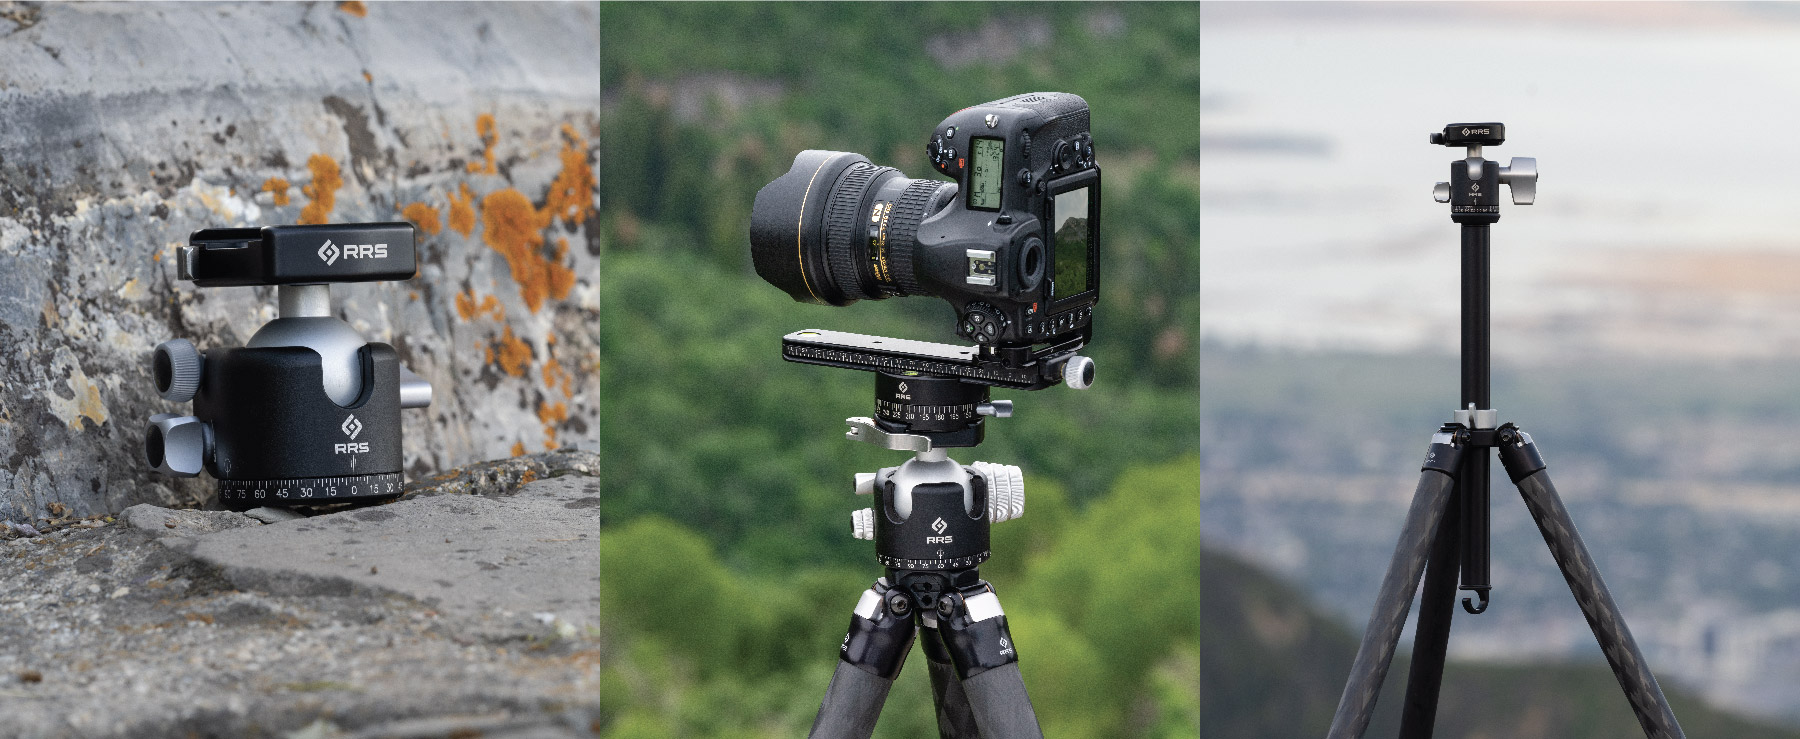 Three images of RRS equipment in use a ball head, pano gear, and a tripod.